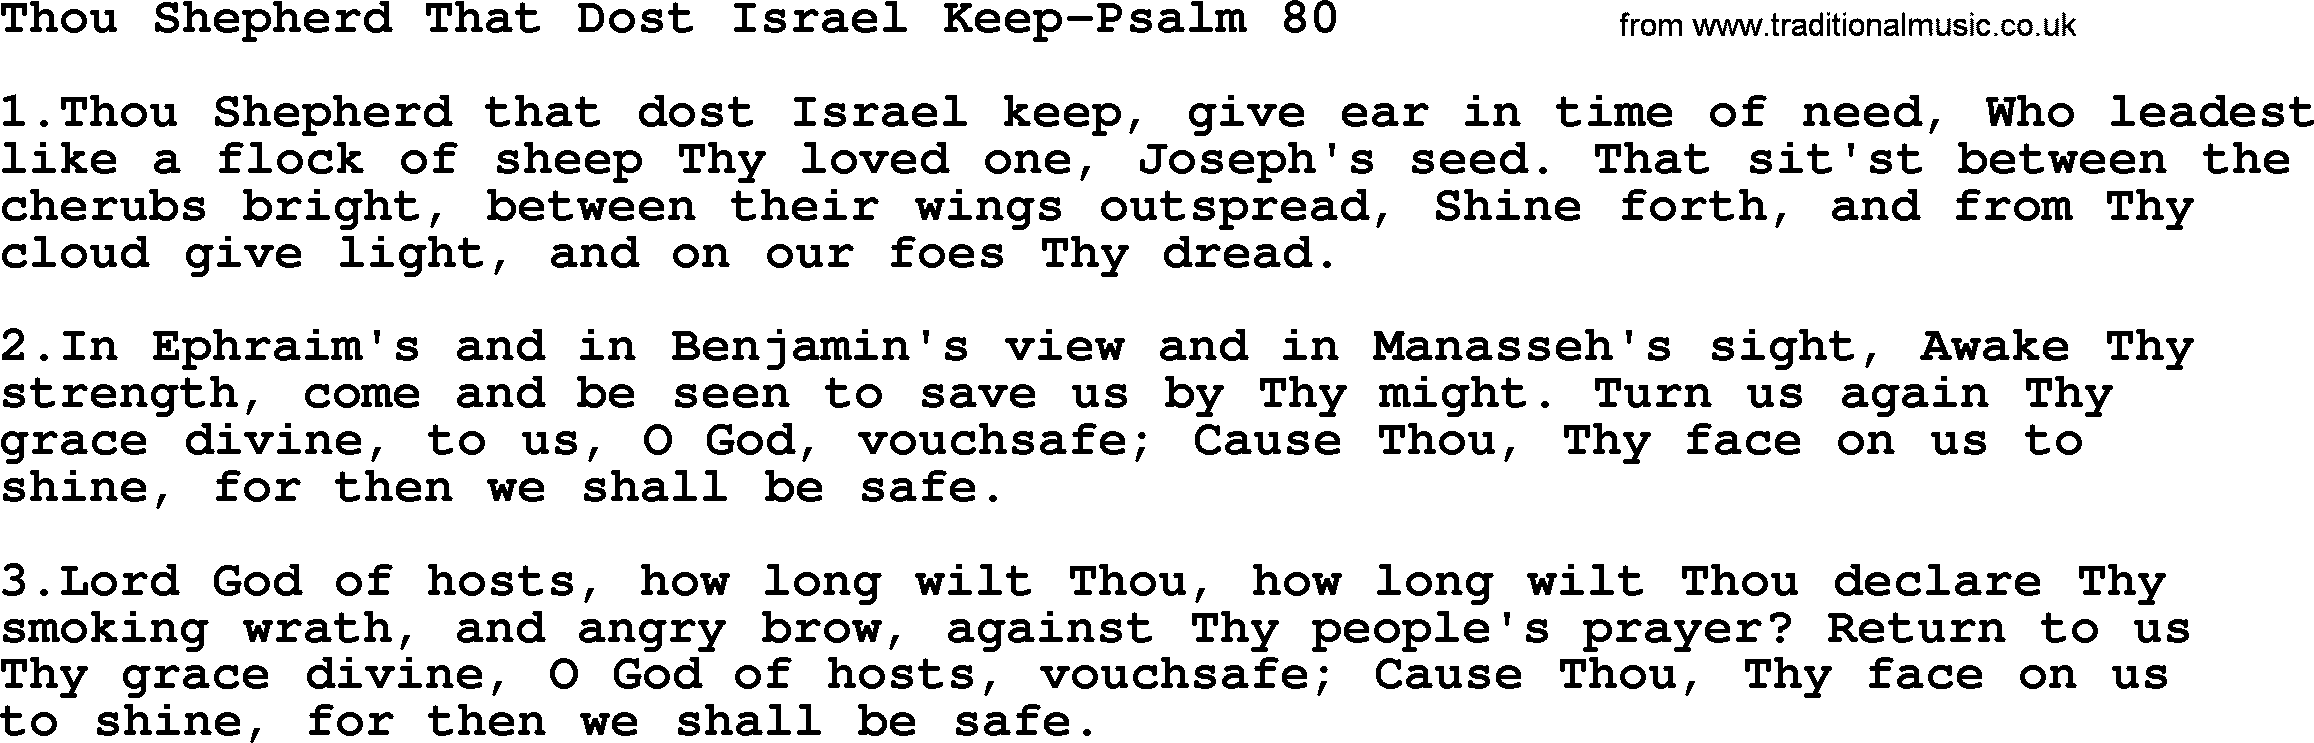 Hymns from the Psalms, Hymn: Thou Shepherd That Dost Israel Keep-Psalm 80, lyrics with PDF